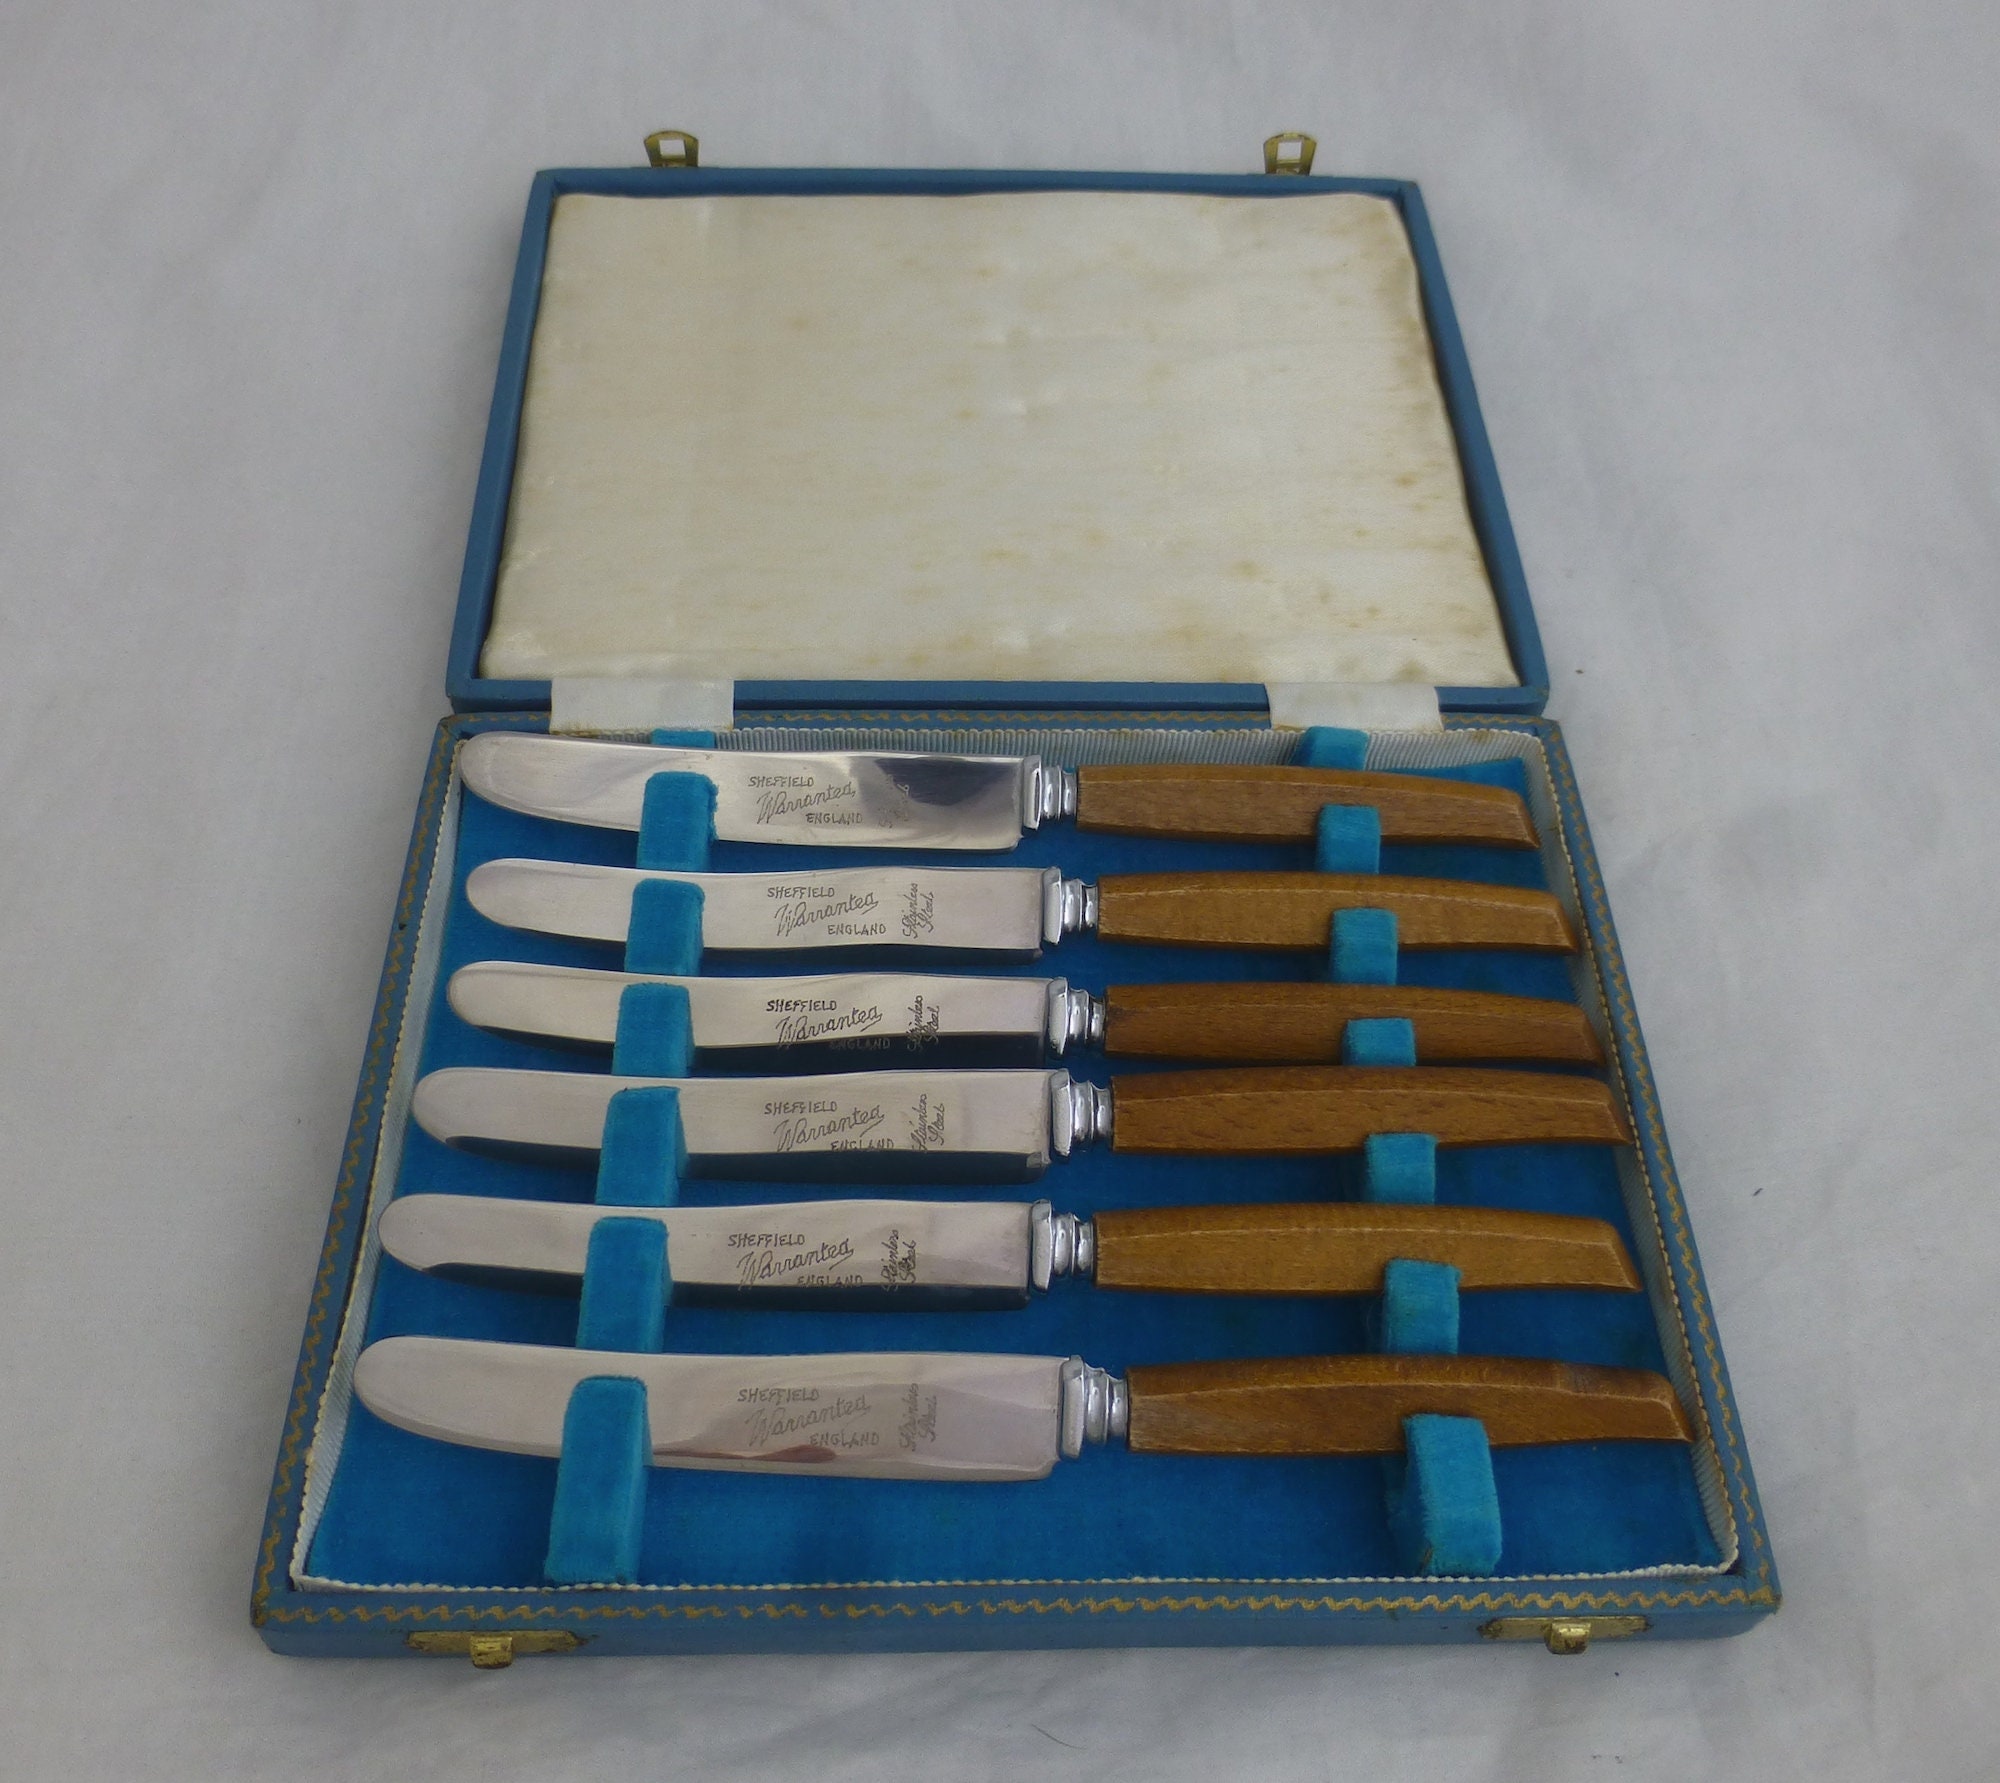 Sold at Auction: 7 Vintage Wood Chisels - includes makers such as, Hale  Bros. Sheffield England, Ward, etc.